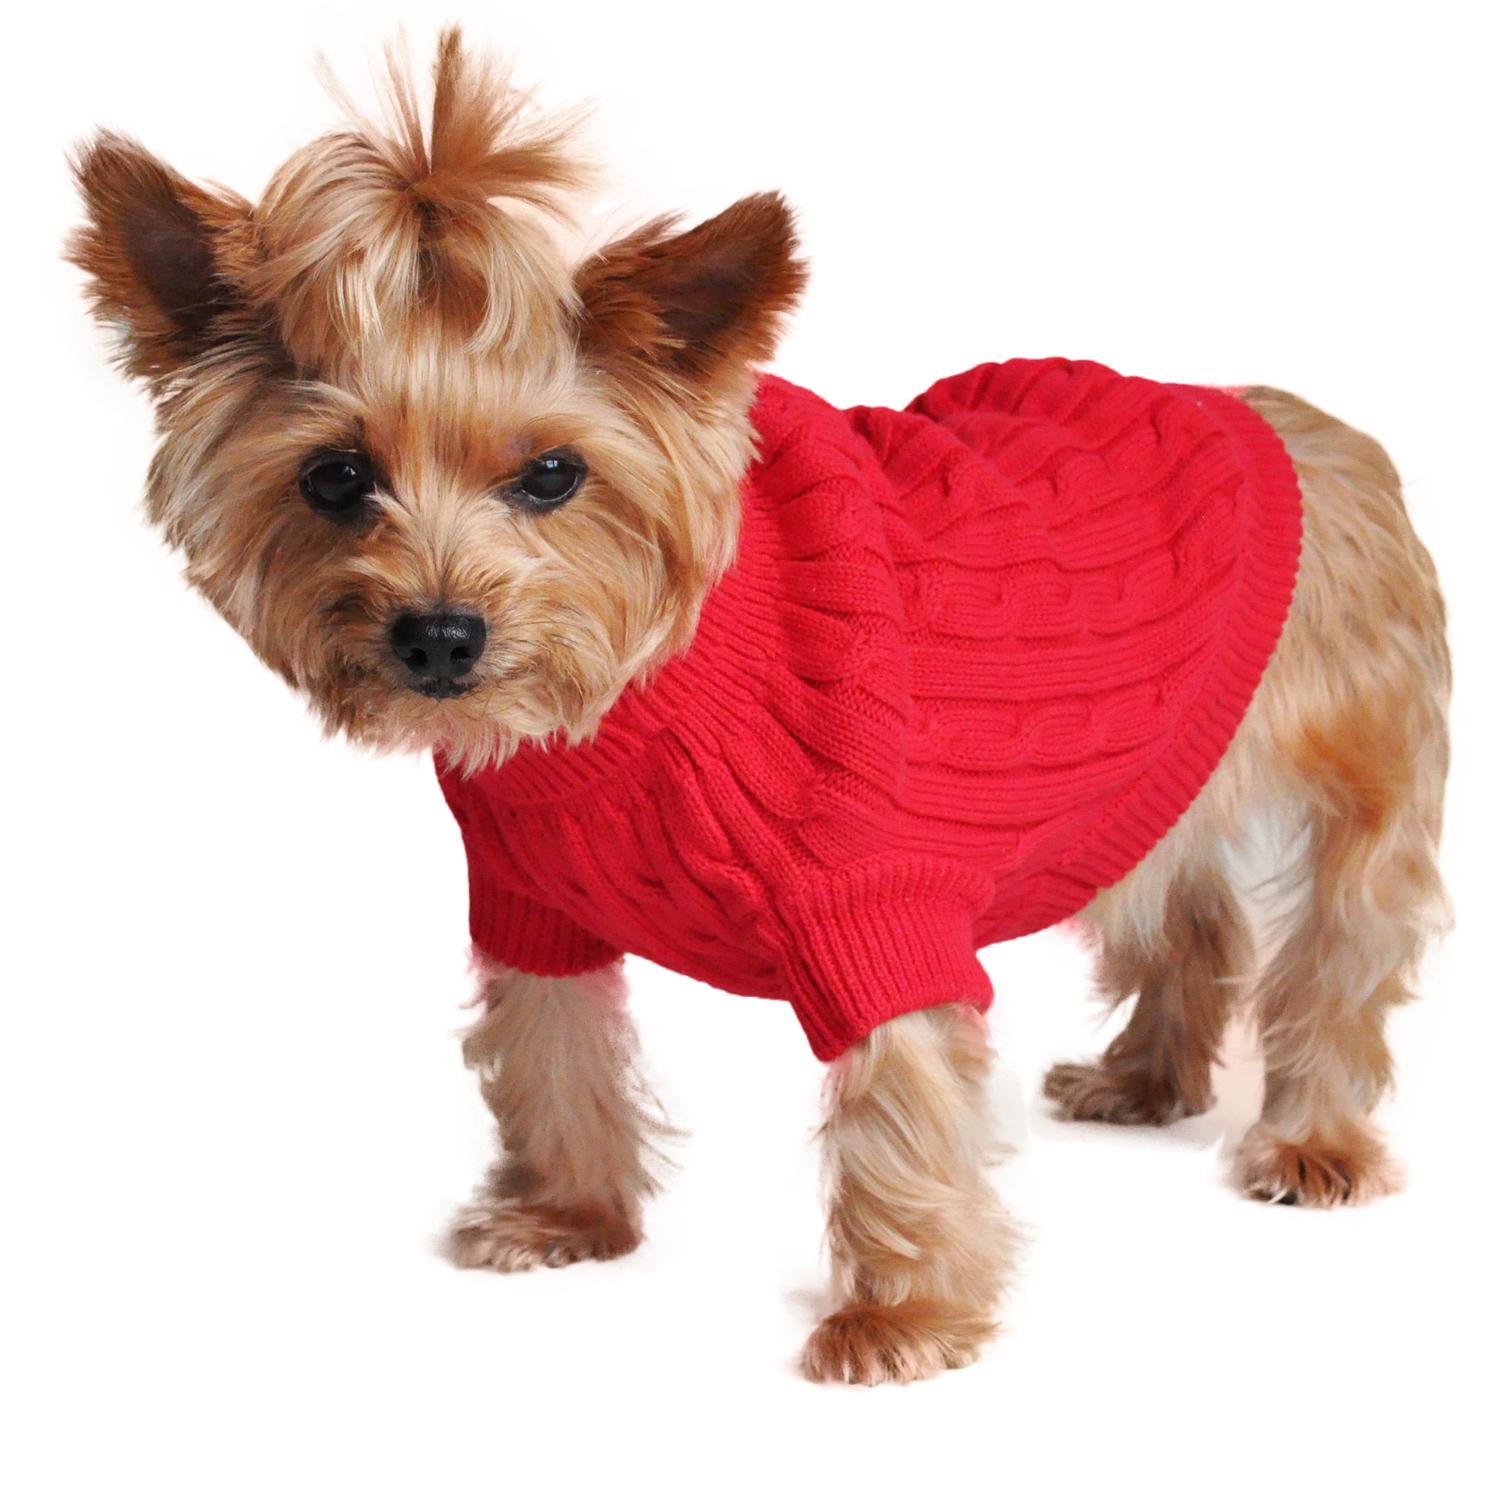 Cable Knit Dog Sweater by Doggie Design - Fiery Red